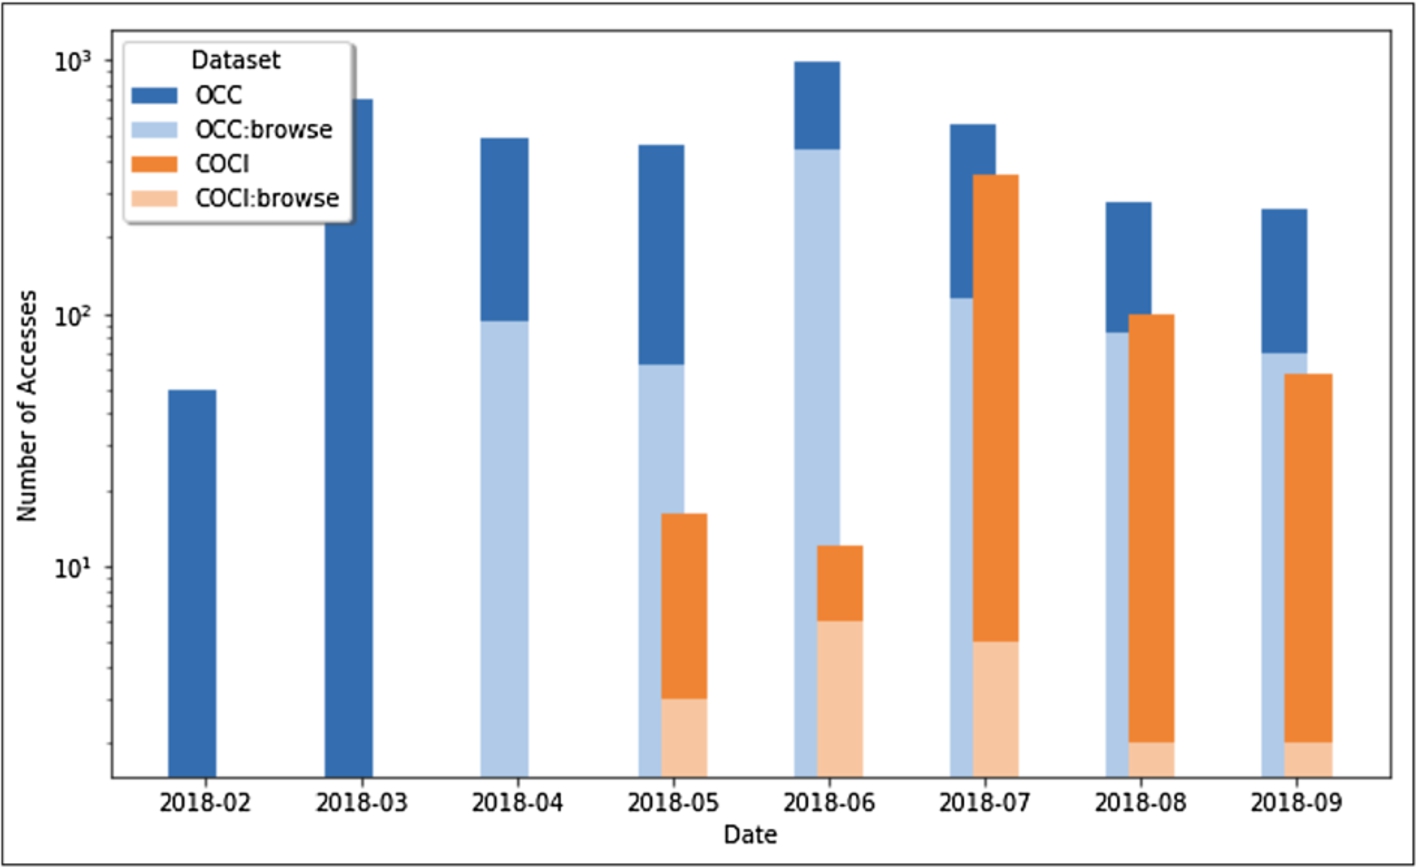 The number of queries launched through OSCAR from the OpenCitations web site, searching for OCC or COCI resources, for each different month starting from February 2018 to September 2018. For each dataset we show the number of queries that led to subsequent LUCINDA browsing of the metadata returned by the OSCAR search. Note that the vertical axis uses a logarithmic scale.